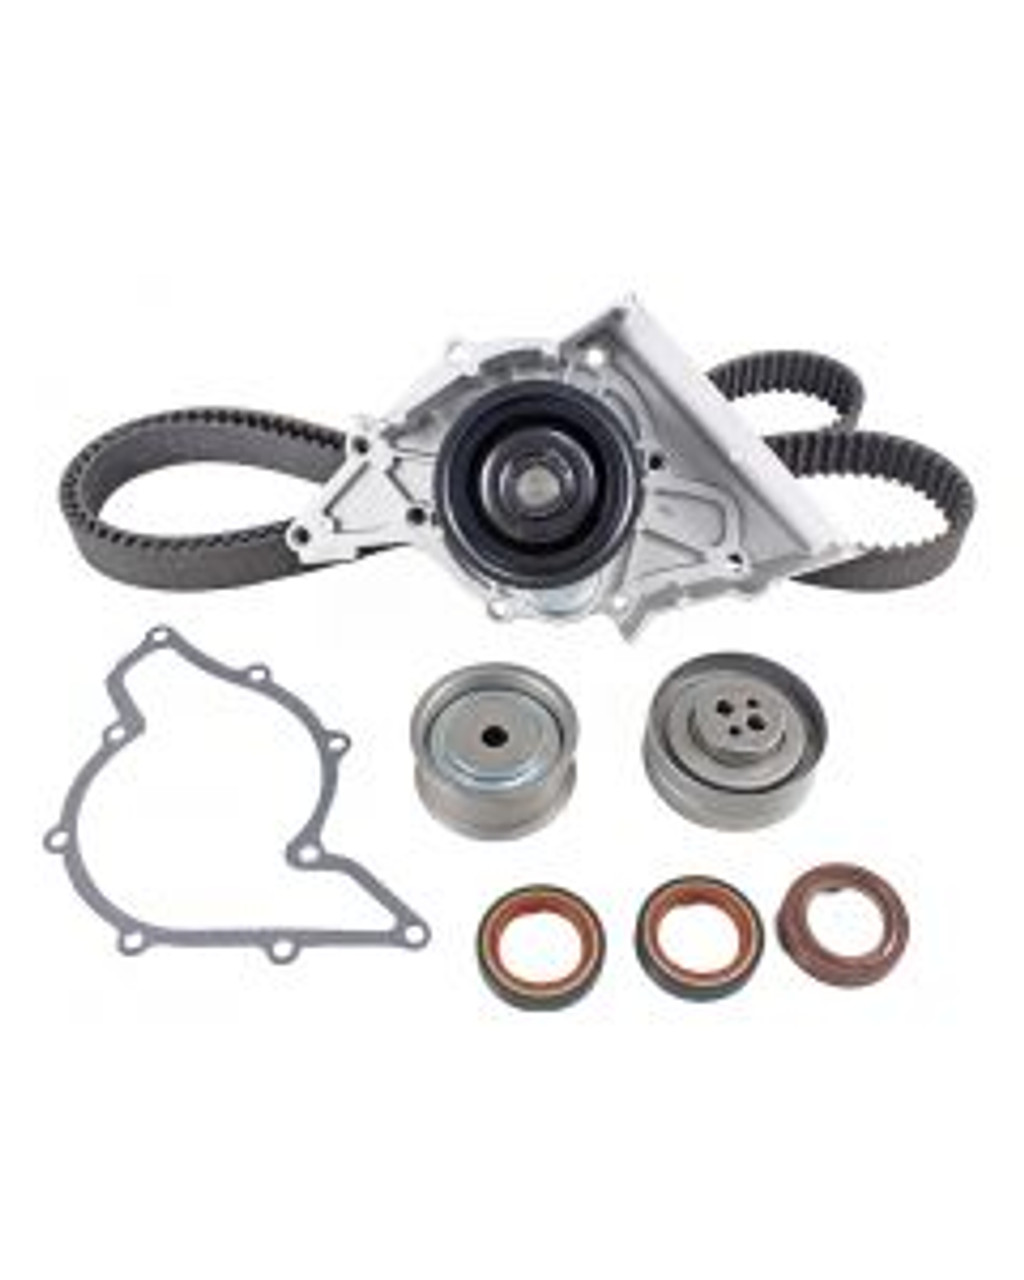 Timing Belt Kit with Water Pump 2.8L 1994 Audi Cabriolet - TBK806BWP.2